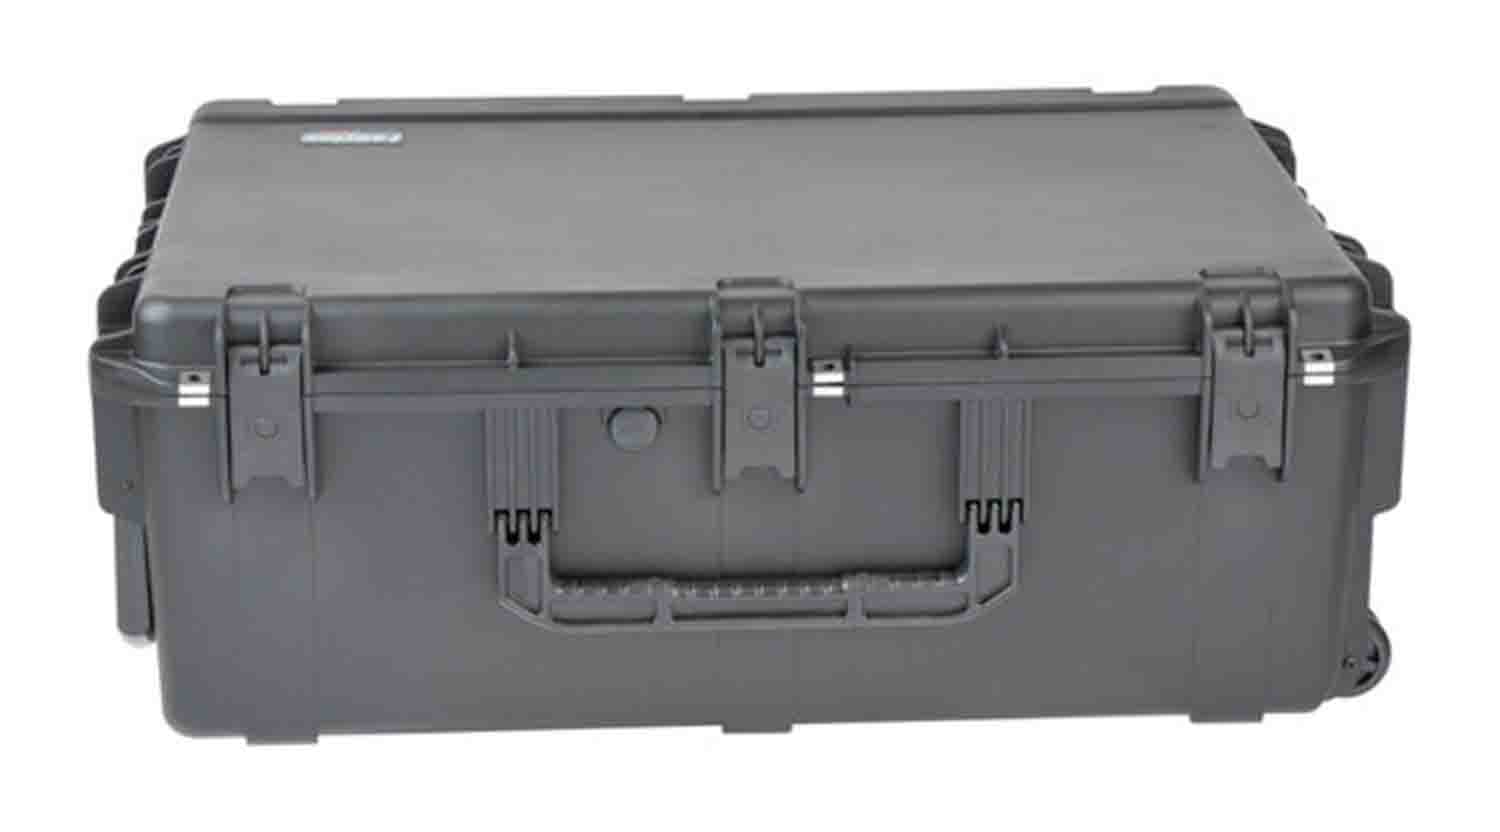 SKB Cases 3I-3424-12BC iSeries 3424-12 Rolling Waterproof Case with Cubed Foam - Hollywood DJ